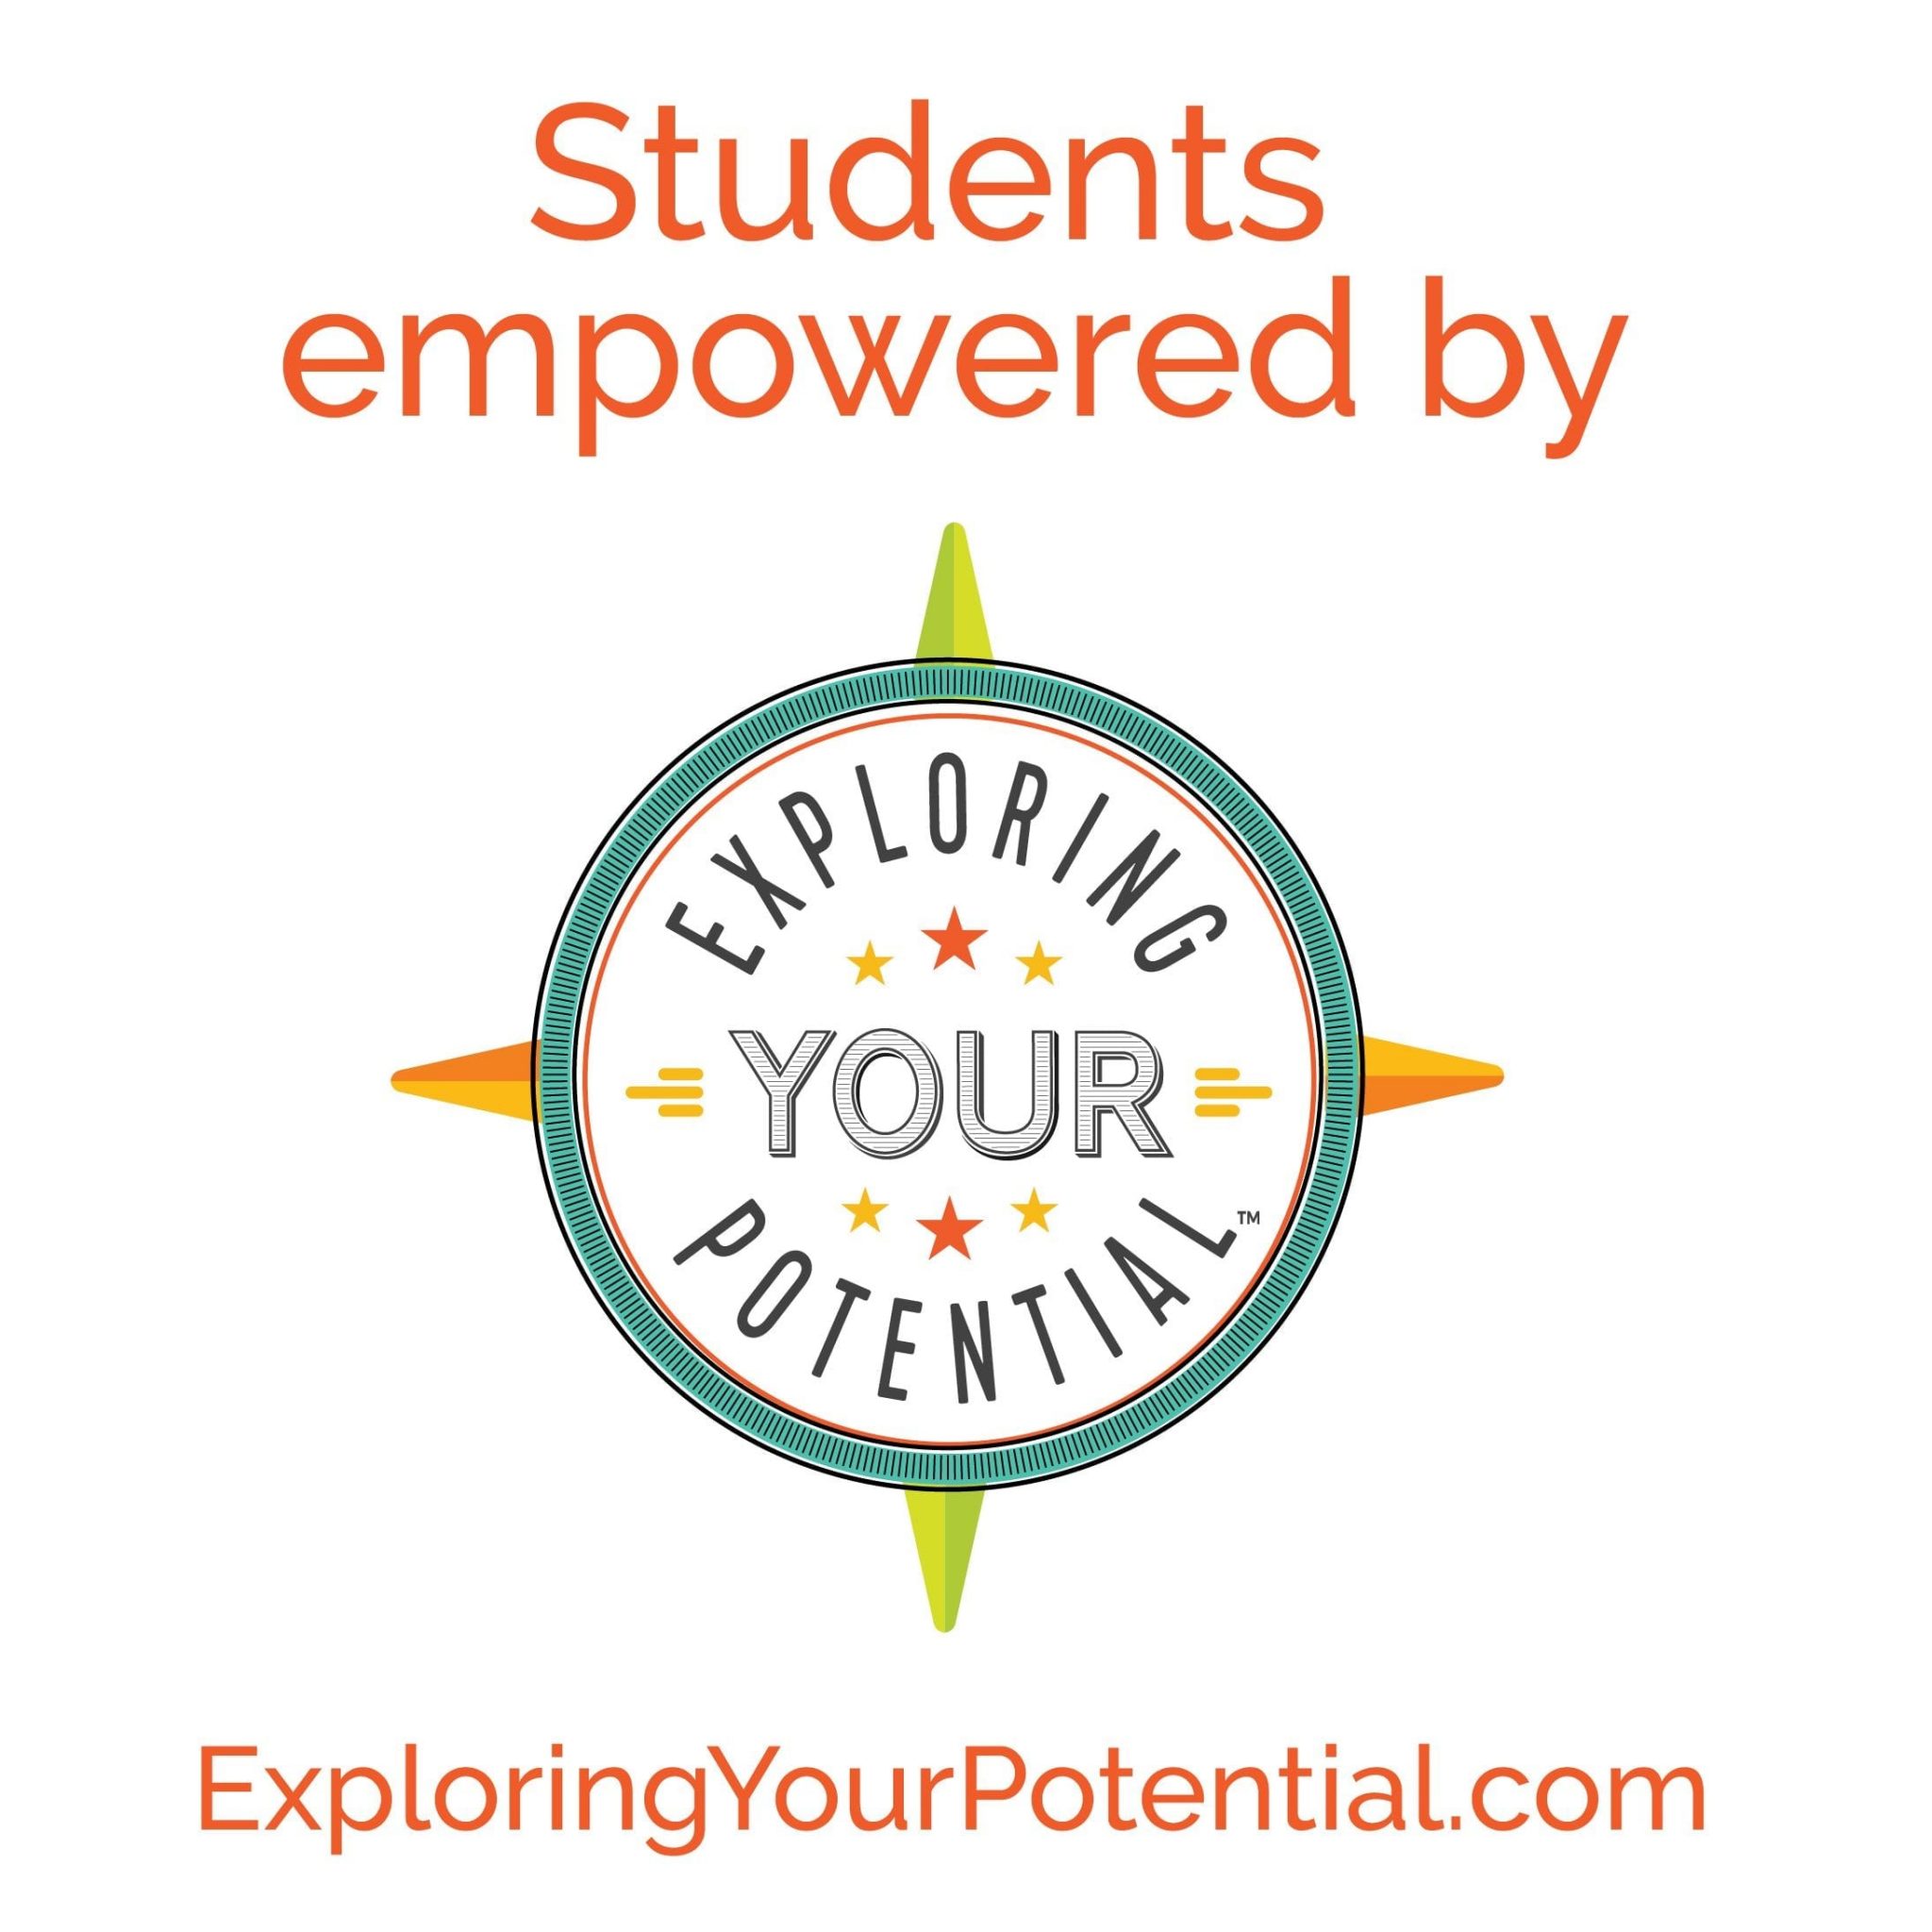 Students Empowered by Exploring Your Potential™